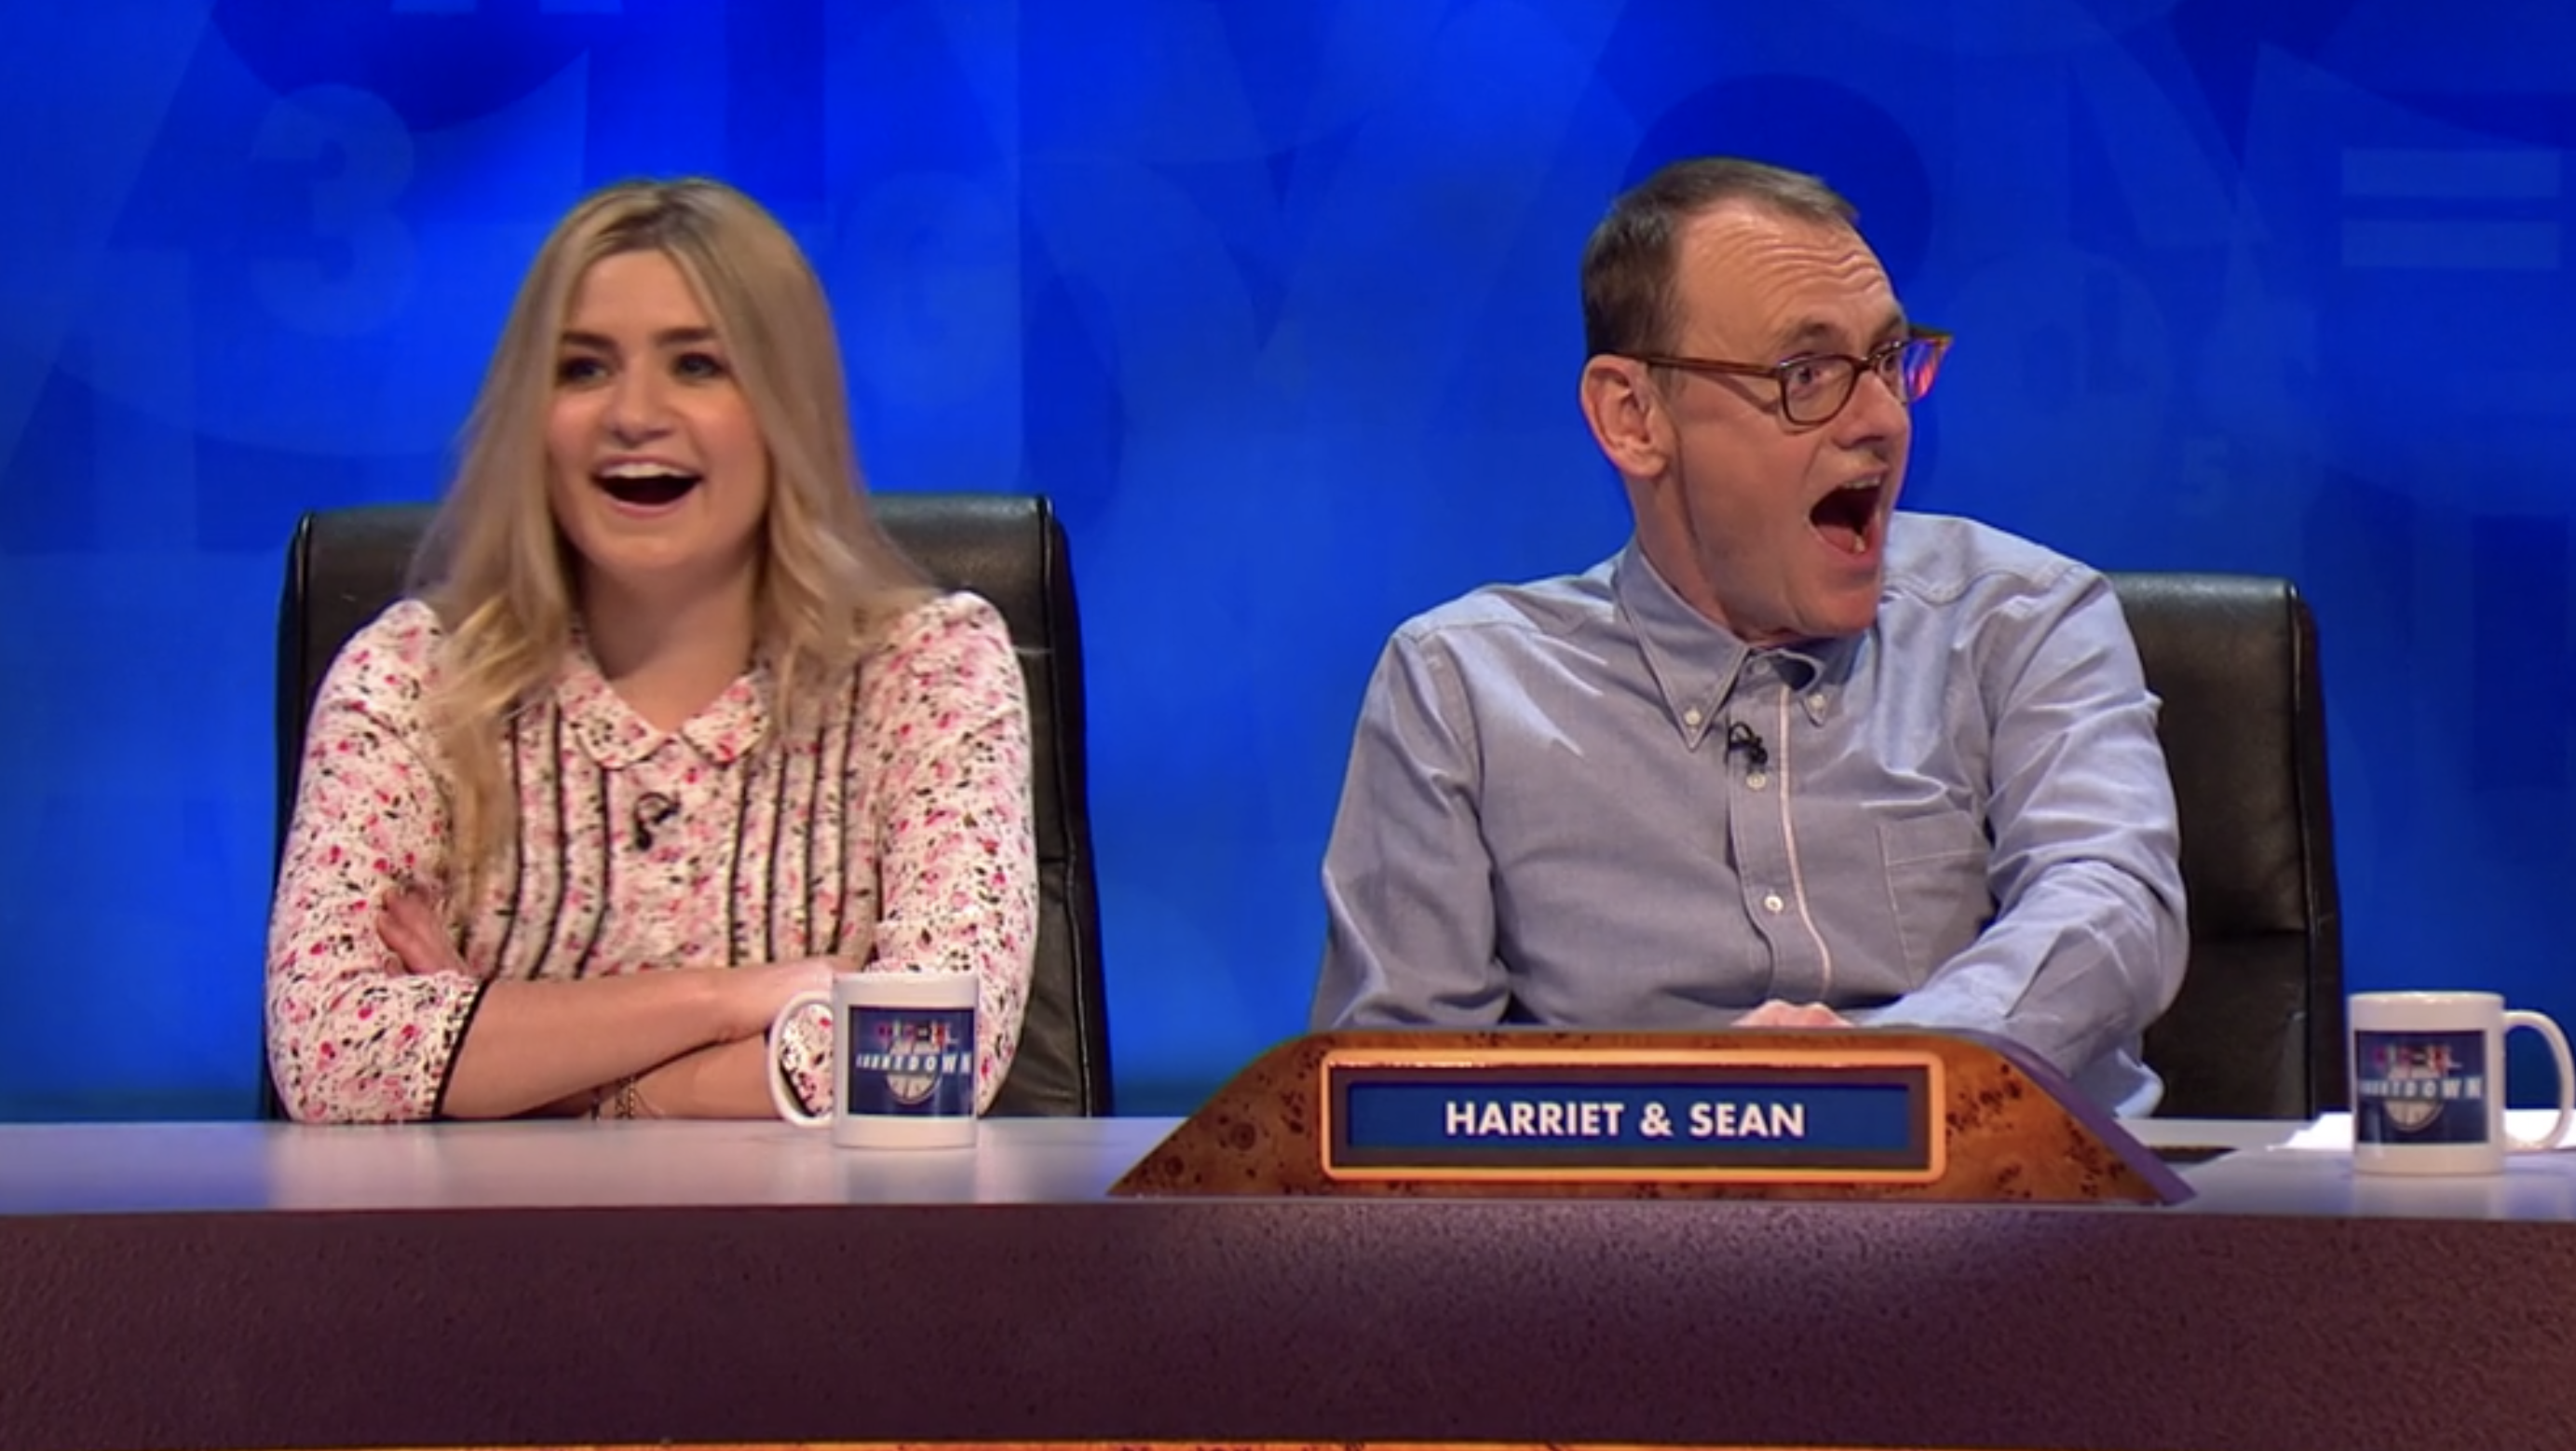 8 Out of 10 Cats Does Countdown: Is Harriet Sean Lock's real daughter?